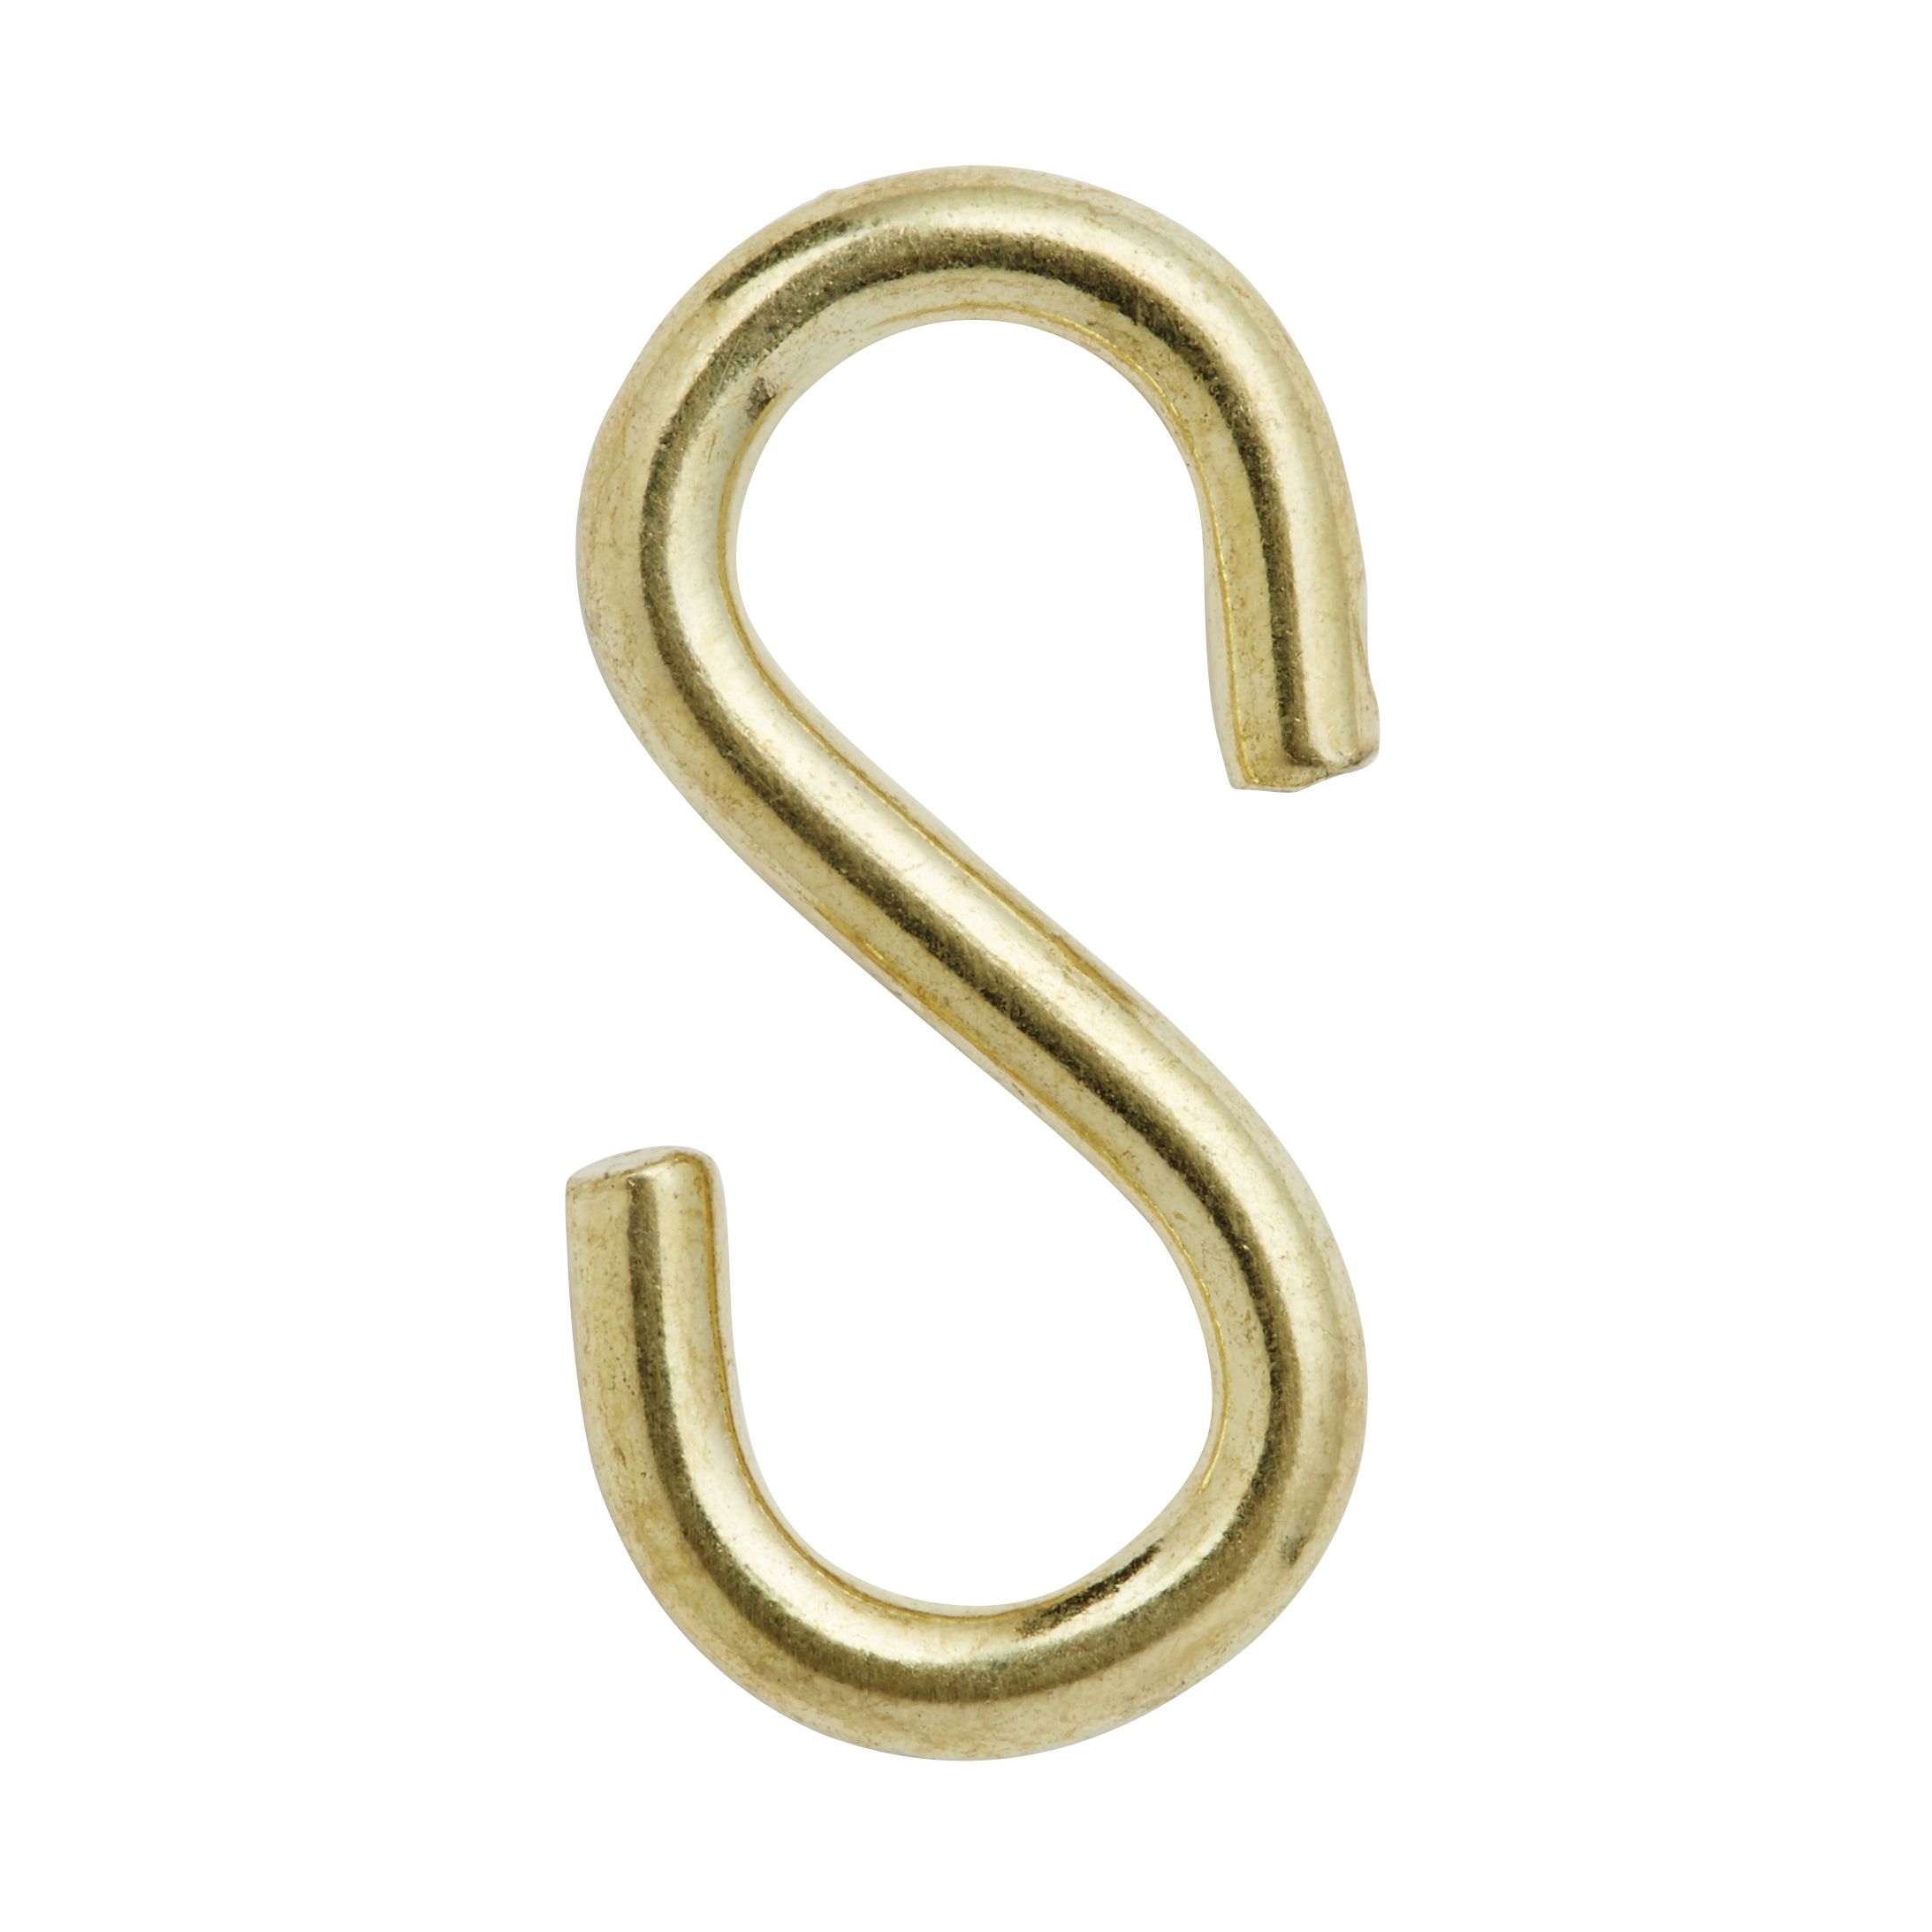 Diall Brass-plated Steel S-hook (L)30mm, Pack of 4